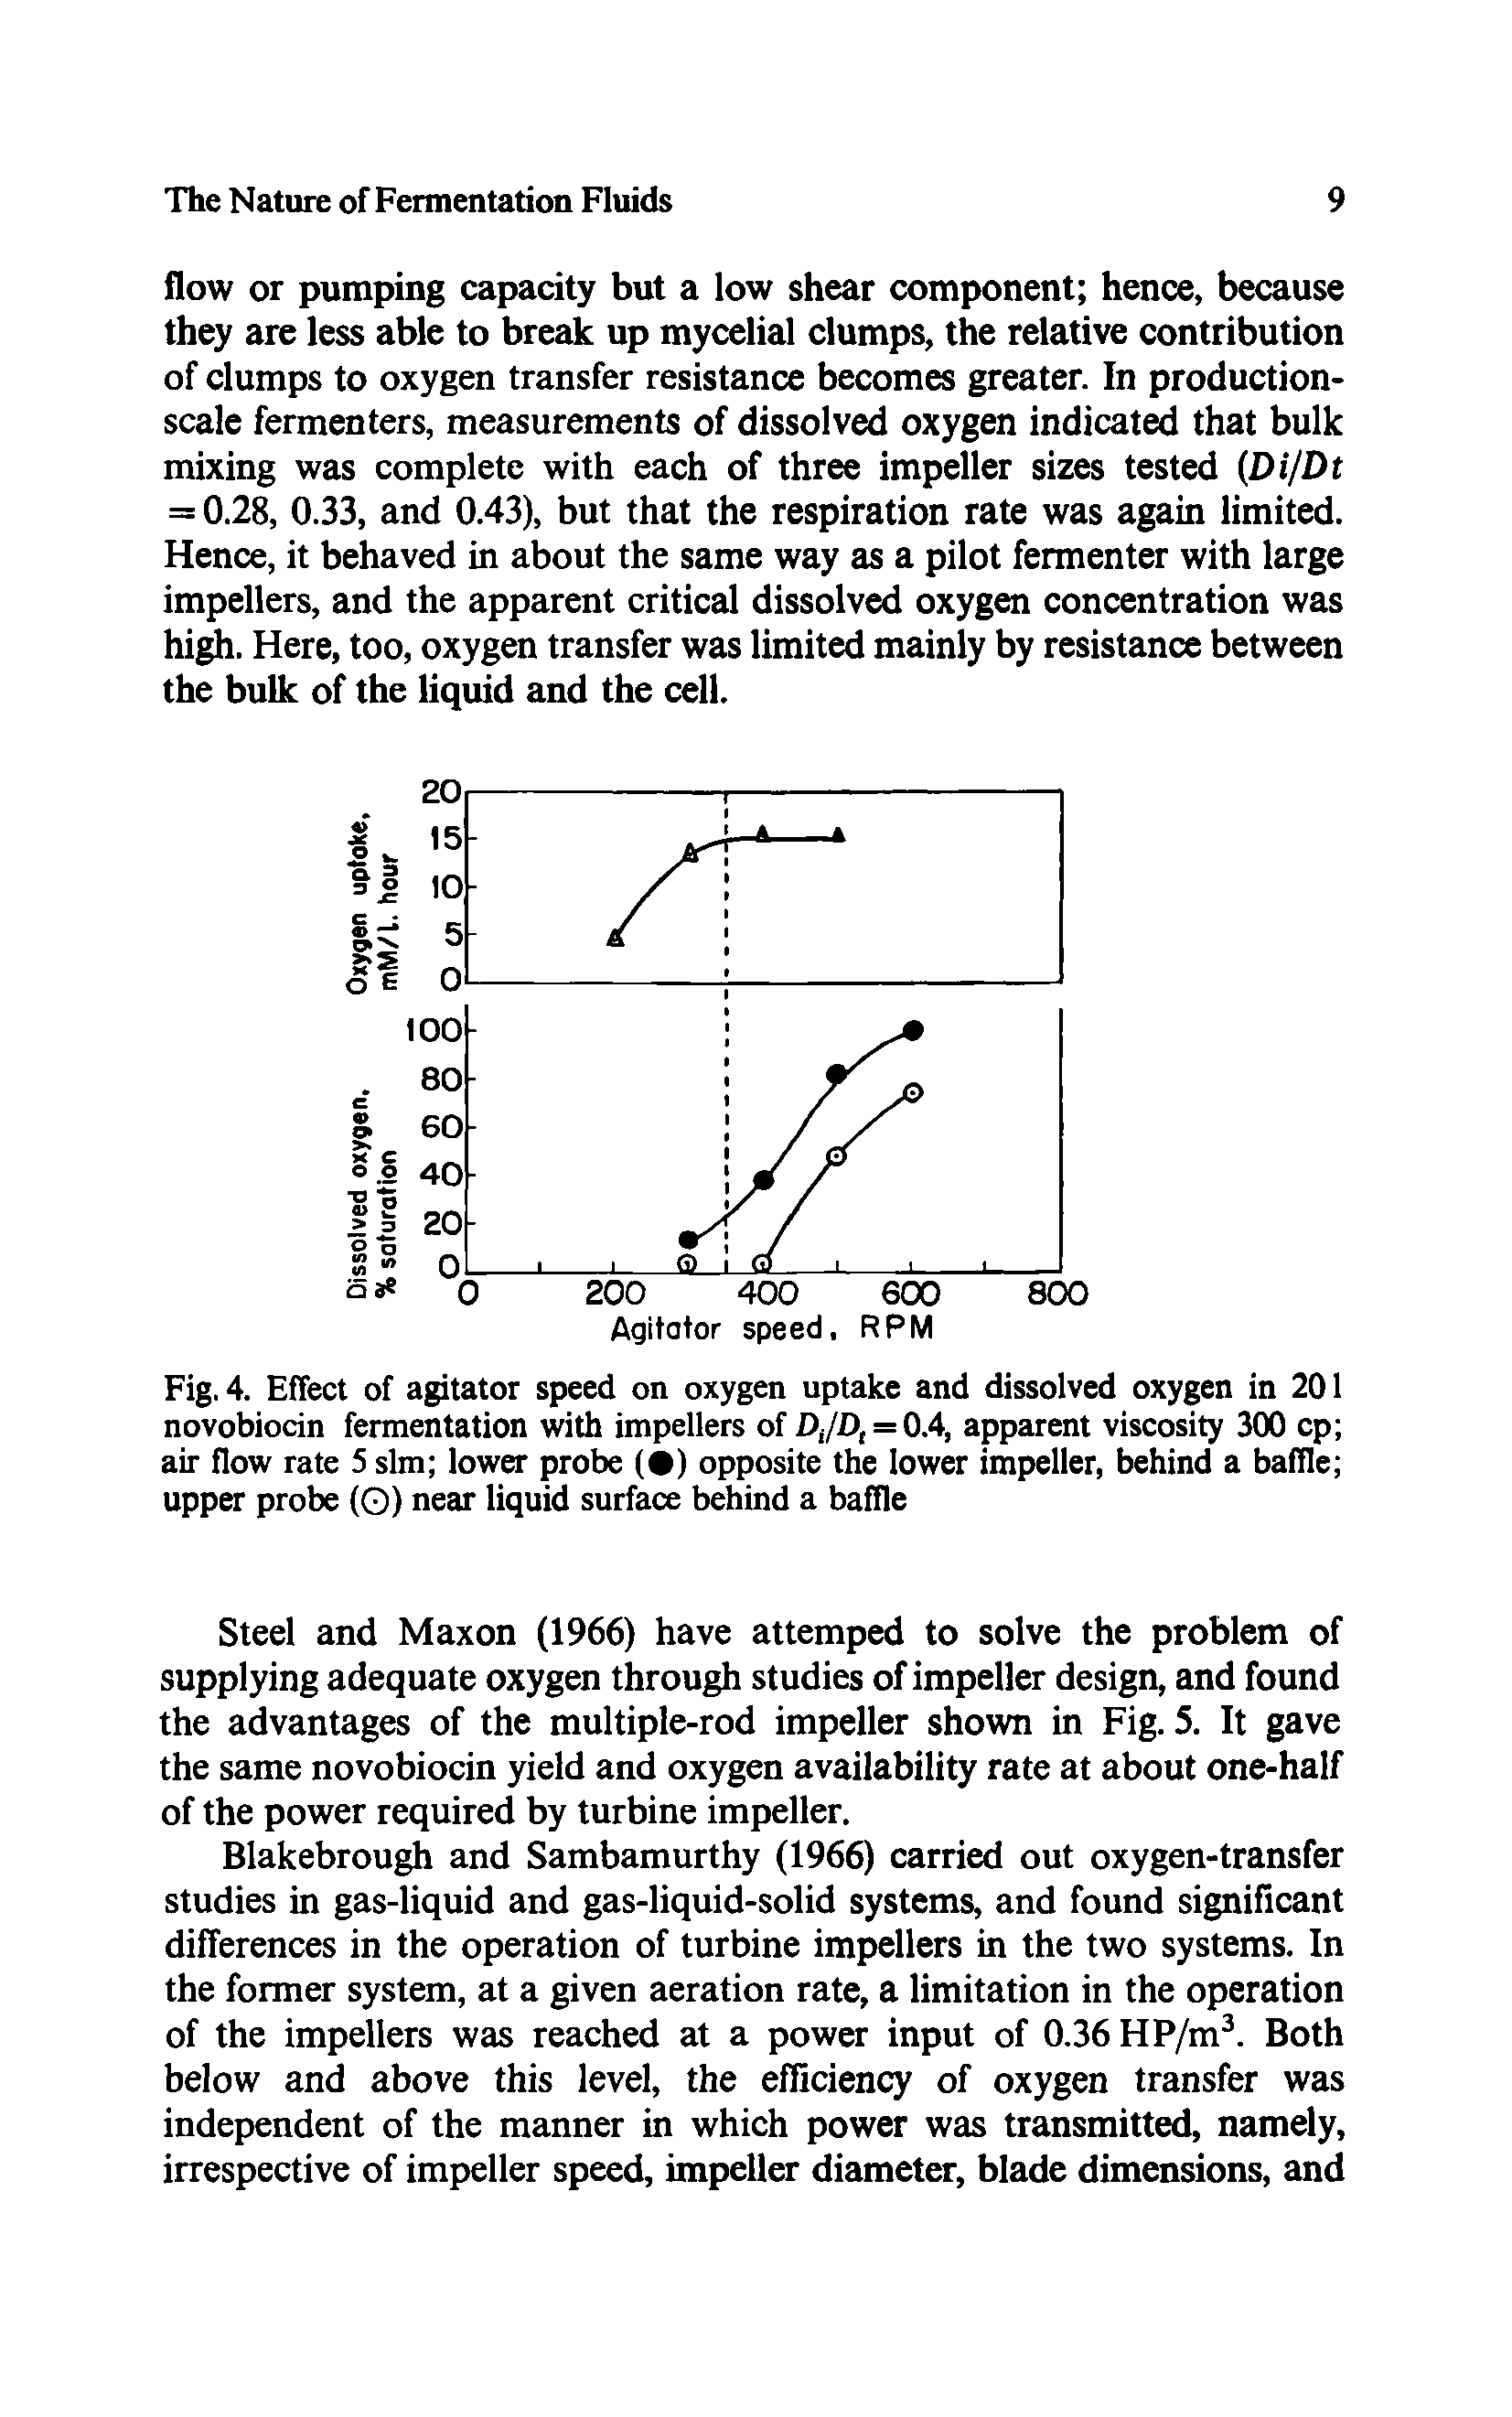 Fig. 4. Effect of agitator speed on oxygen uptake and dissolved oxygen in 201 novobiocin fermentation with impellers of DJD, = 0A, apparent viscosity 300 cp air flow rate 5 slm lower probe ( ) opposite the lower impeller, behind a baffle upper probe (O) near liquid surface behind a bafile...